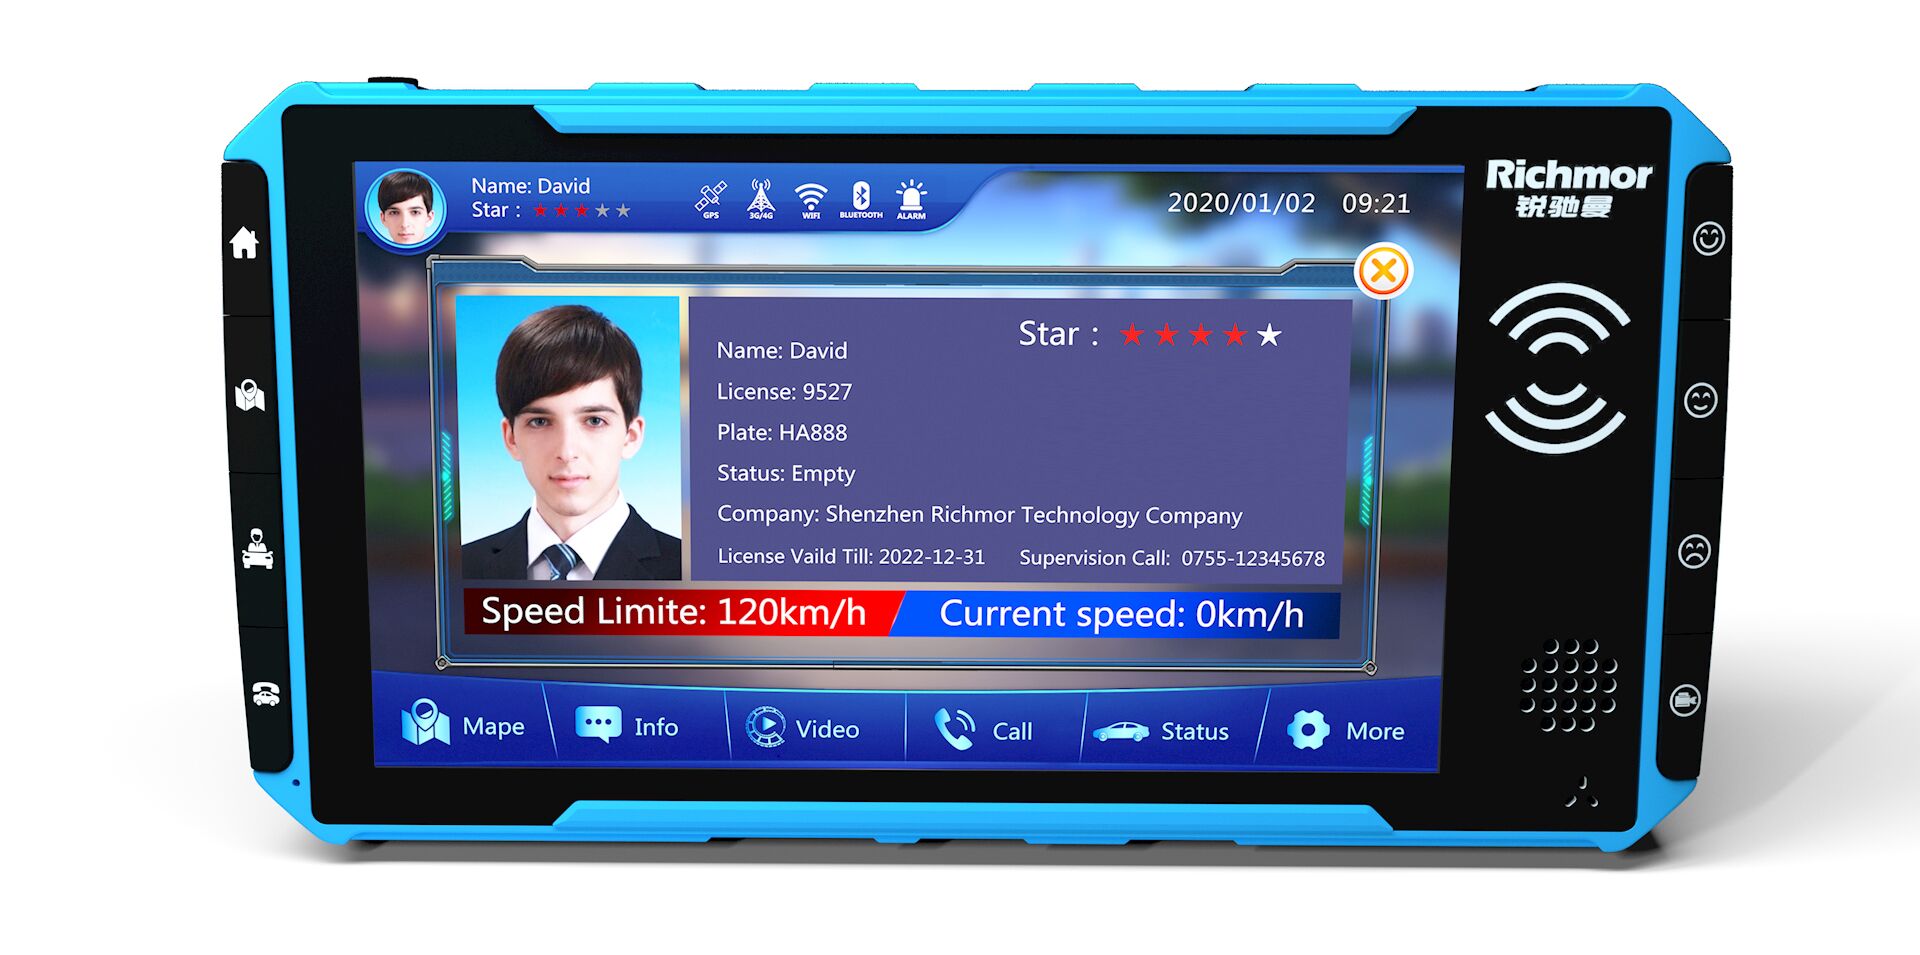 Touch screen Monitor for Taxi Mobile data terminal Online Mobile DVR